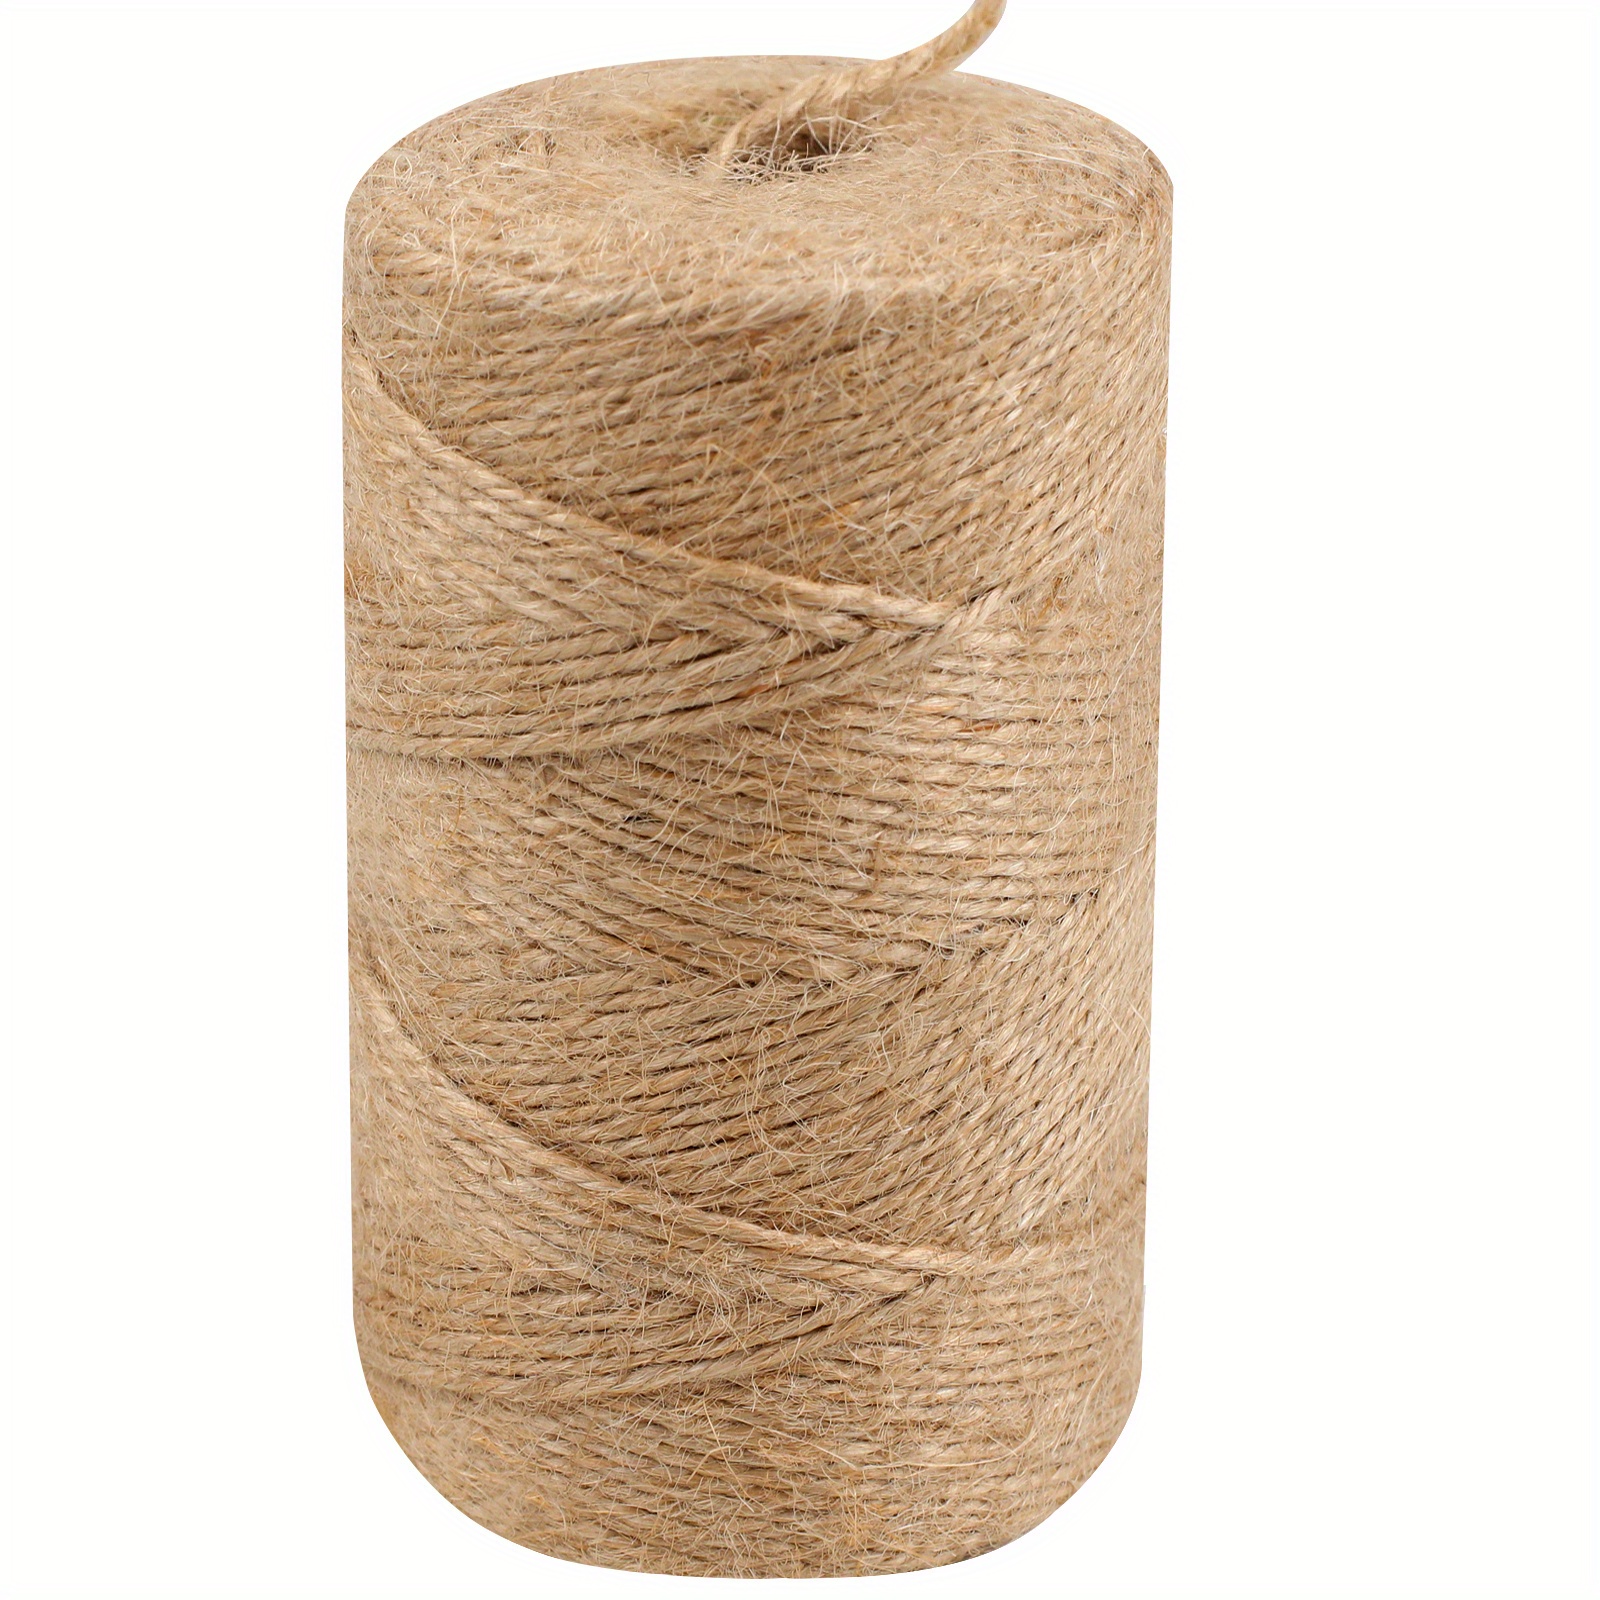 Abtoff 492 ft Natural Jute Twine, Twine String, 3Ply Thin Ribbon Hemp Twine, Twine for Gardening Plant Gift Wrapping Art Wedding Decoration Packing String